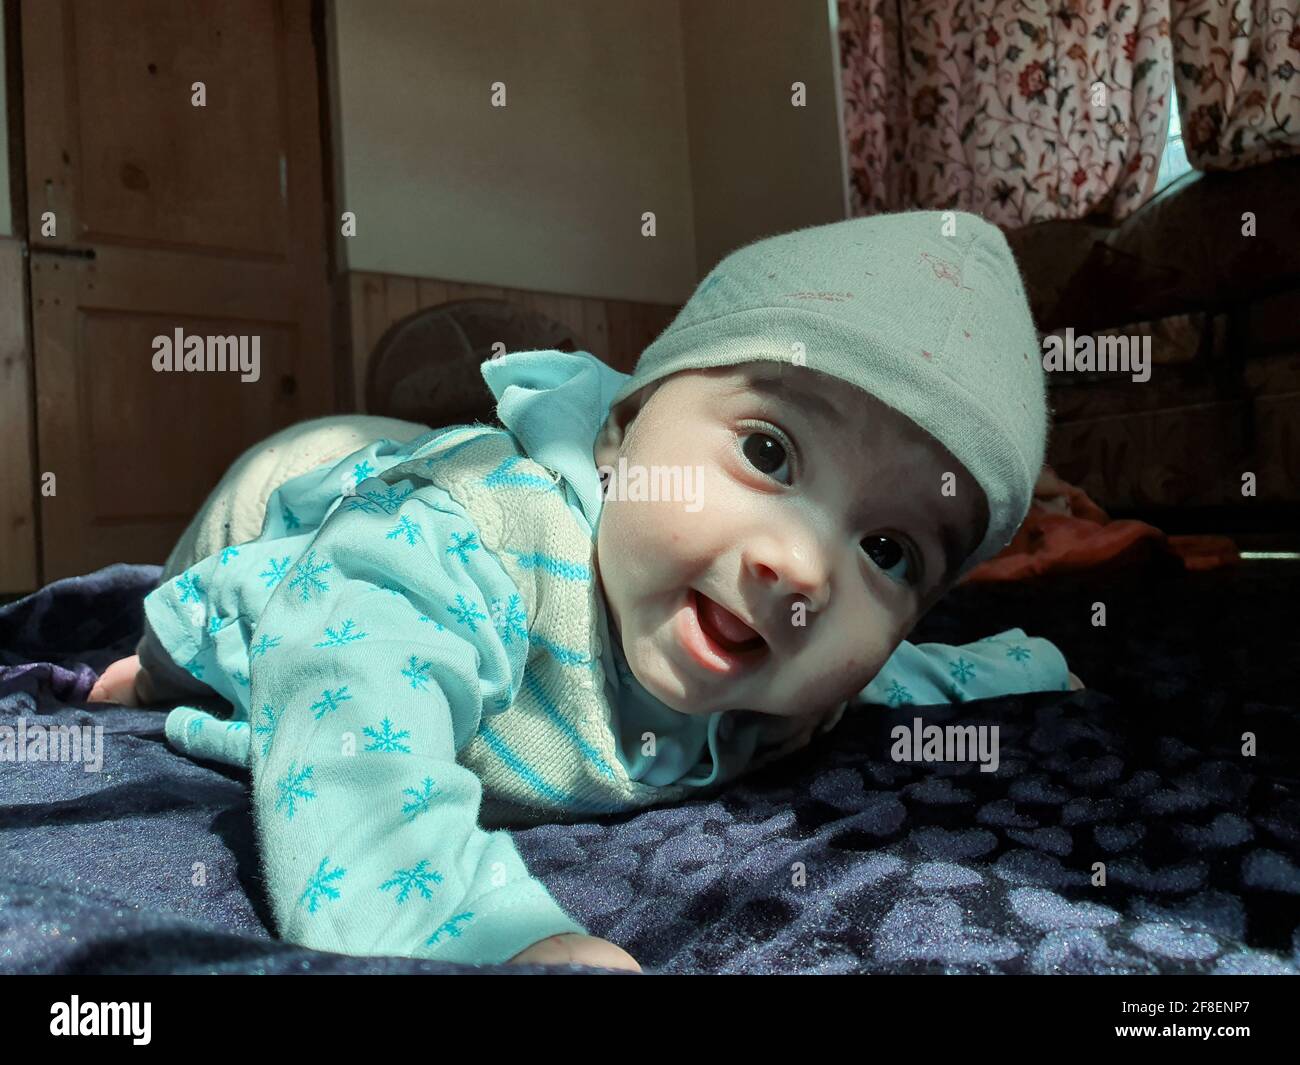 Beautiful kid different poses looks very handsome. Small child after born have soft cheeks and innocent small face with a shing smile. Stock Photo